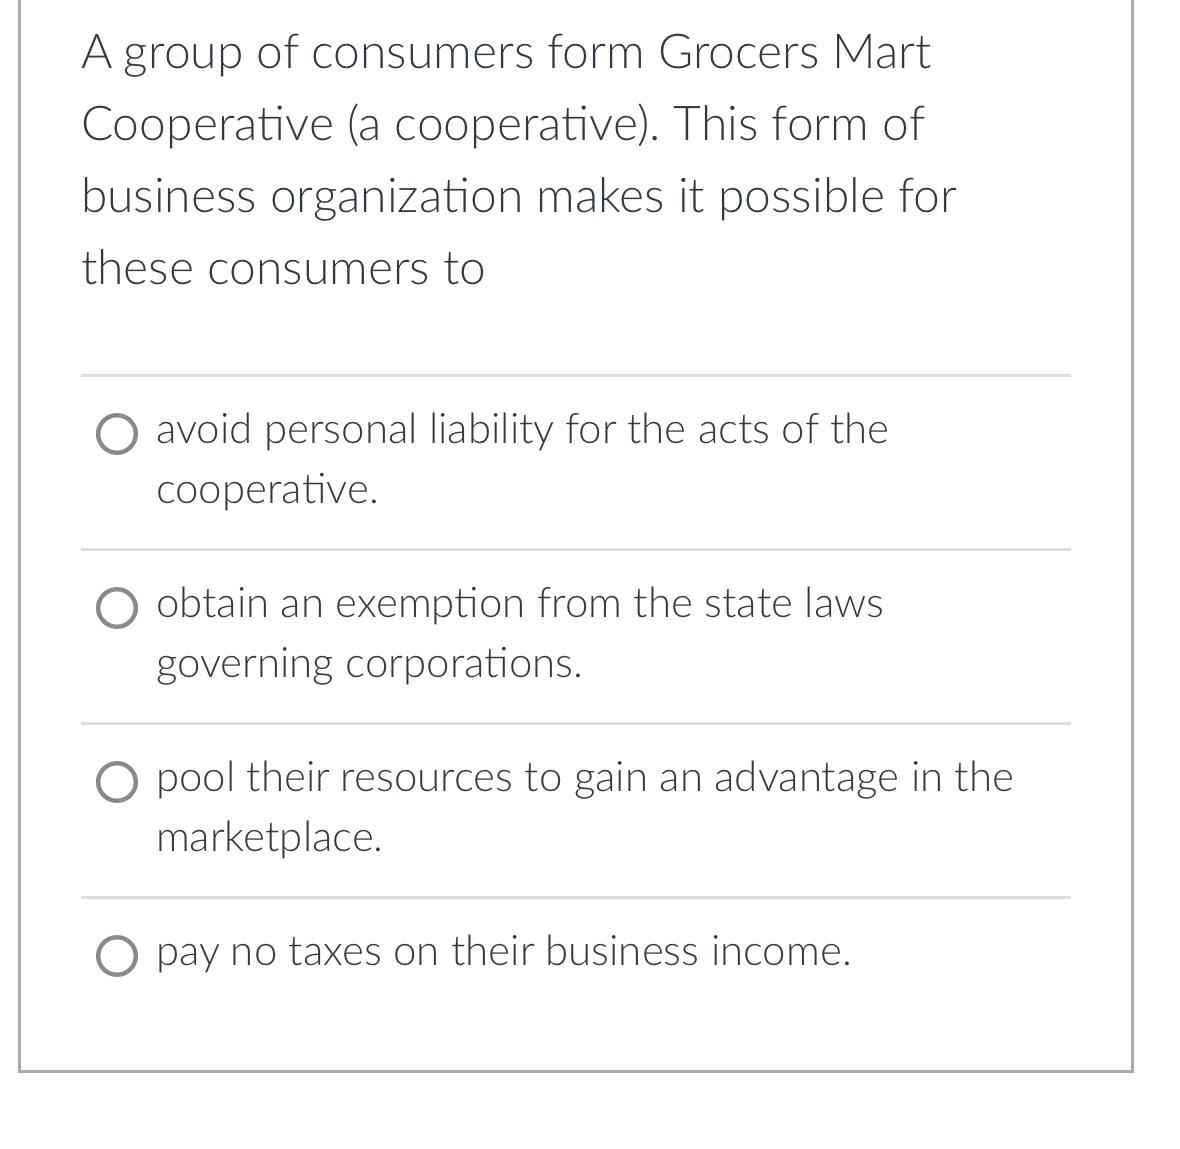 A group of consumers form Grocers Mart Cooperative (a cooperative). This form of business organization makes